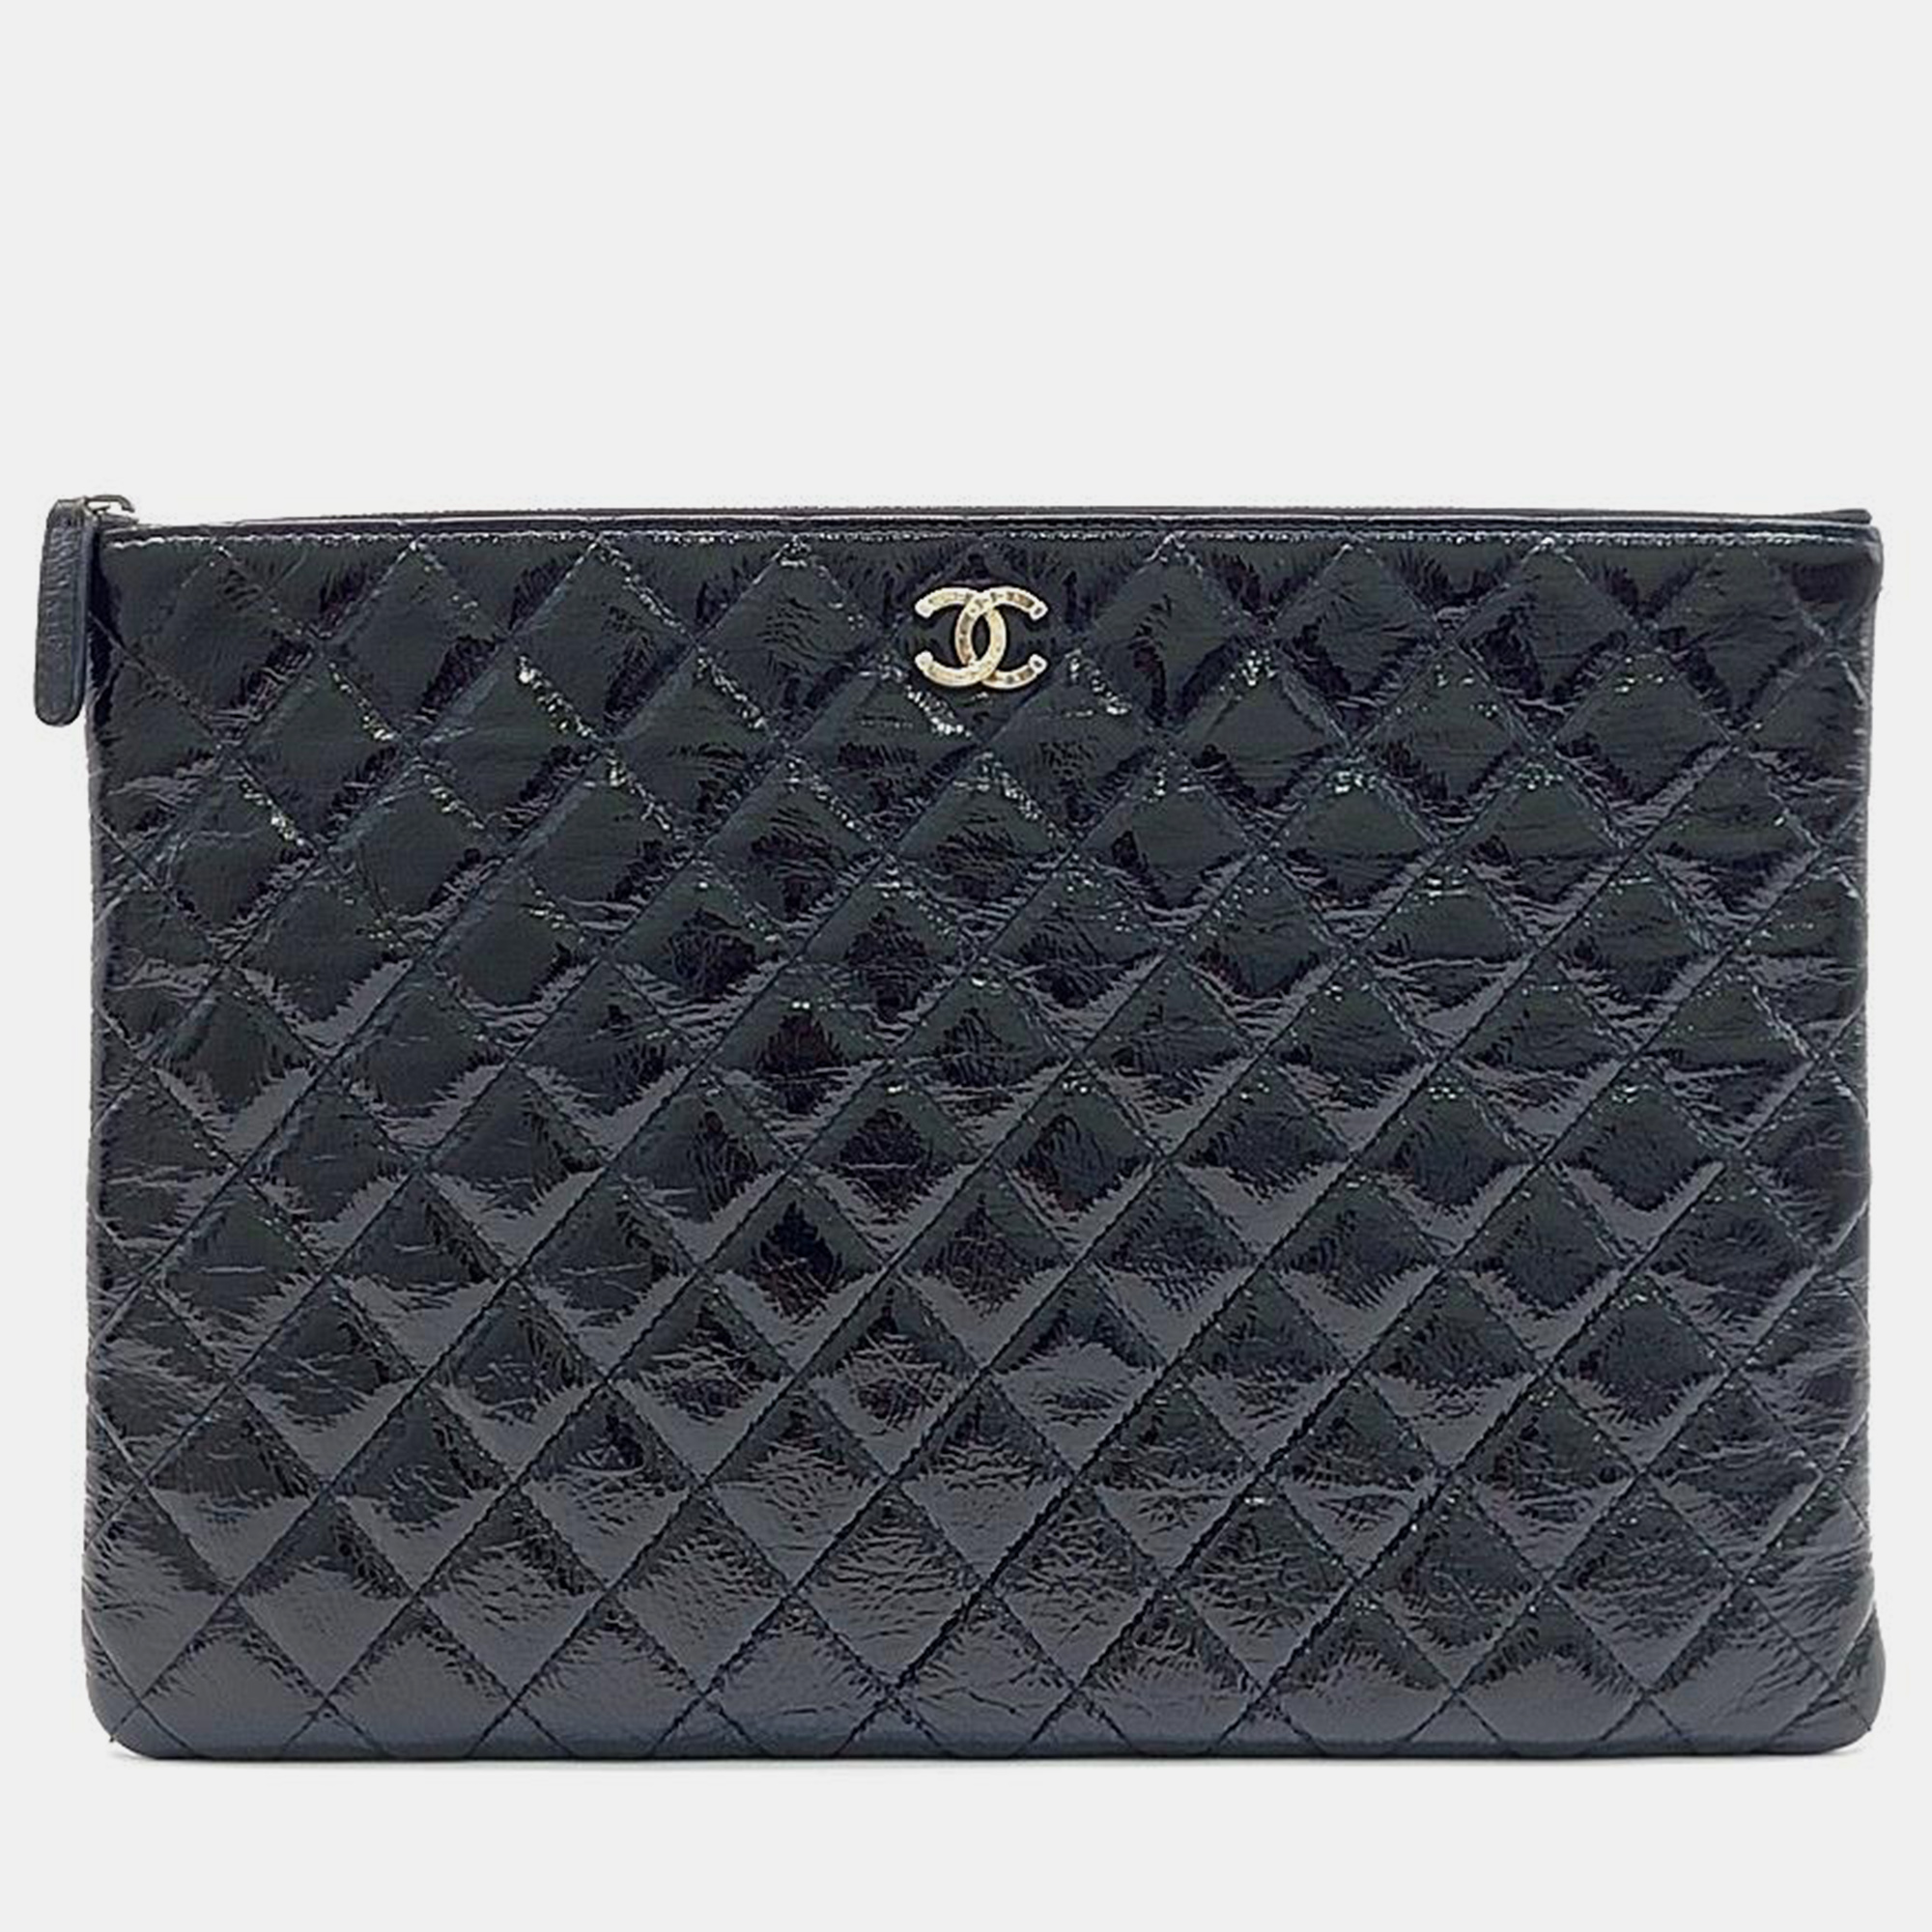 Chanel black patent leather large clutch bag